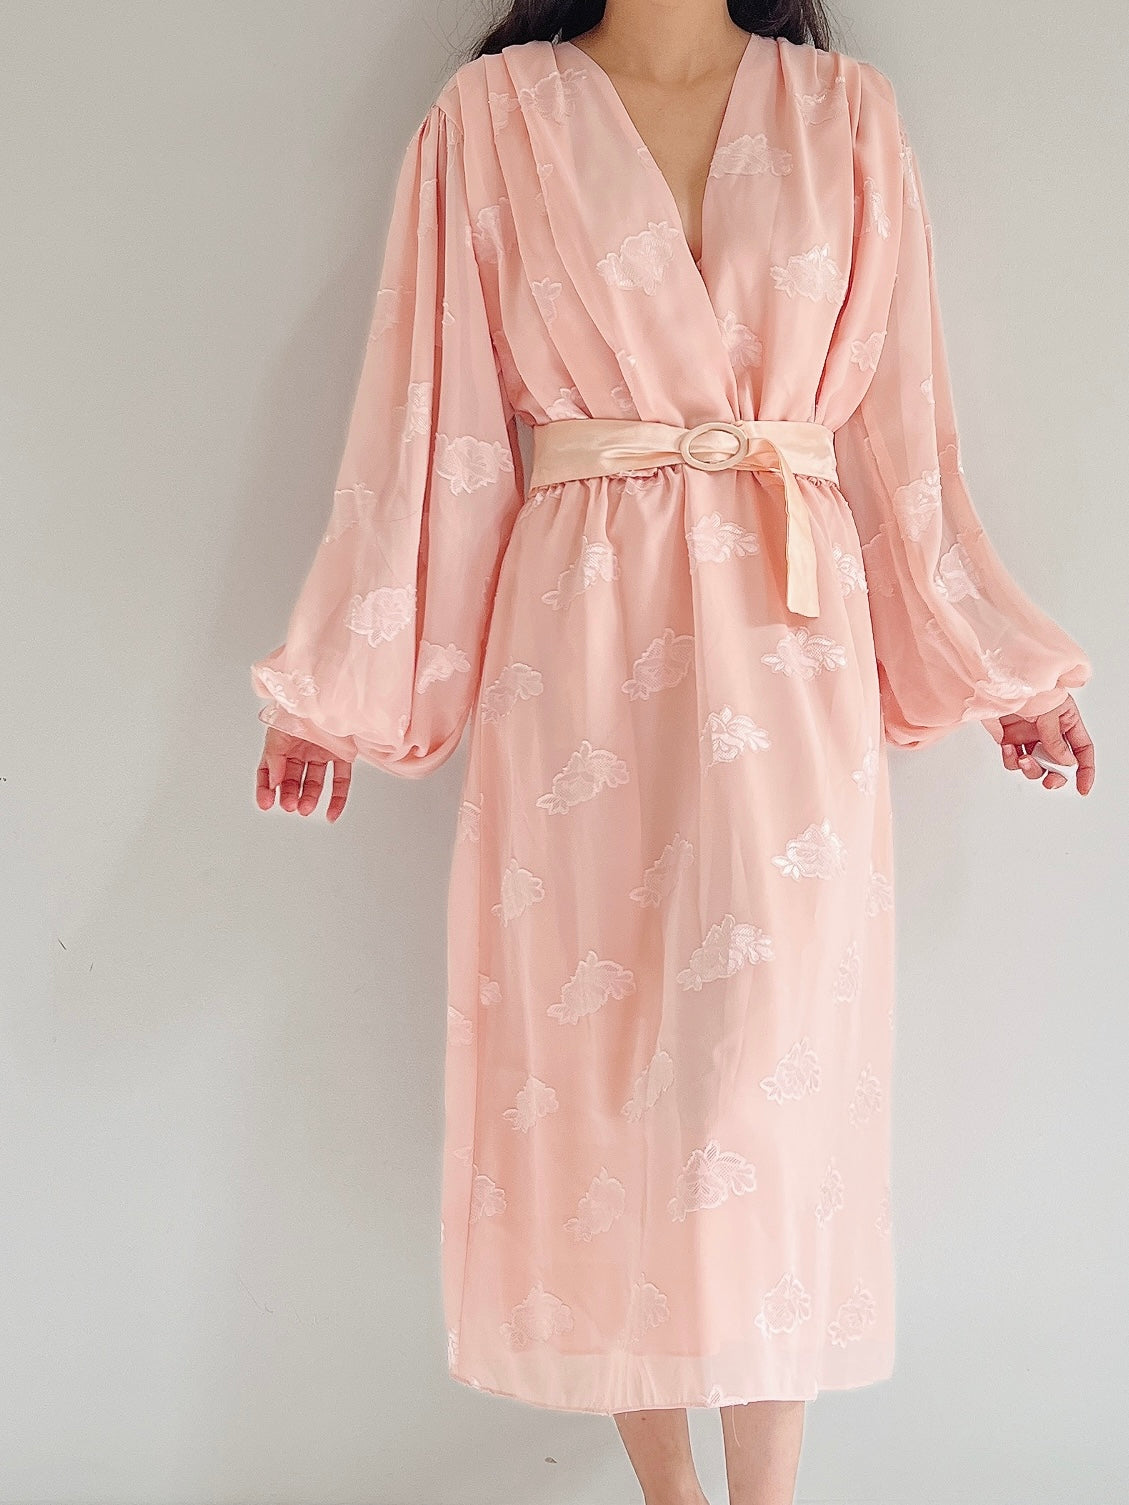 1980s Pink Puffed Sleeves Faux Wrap Dress - M